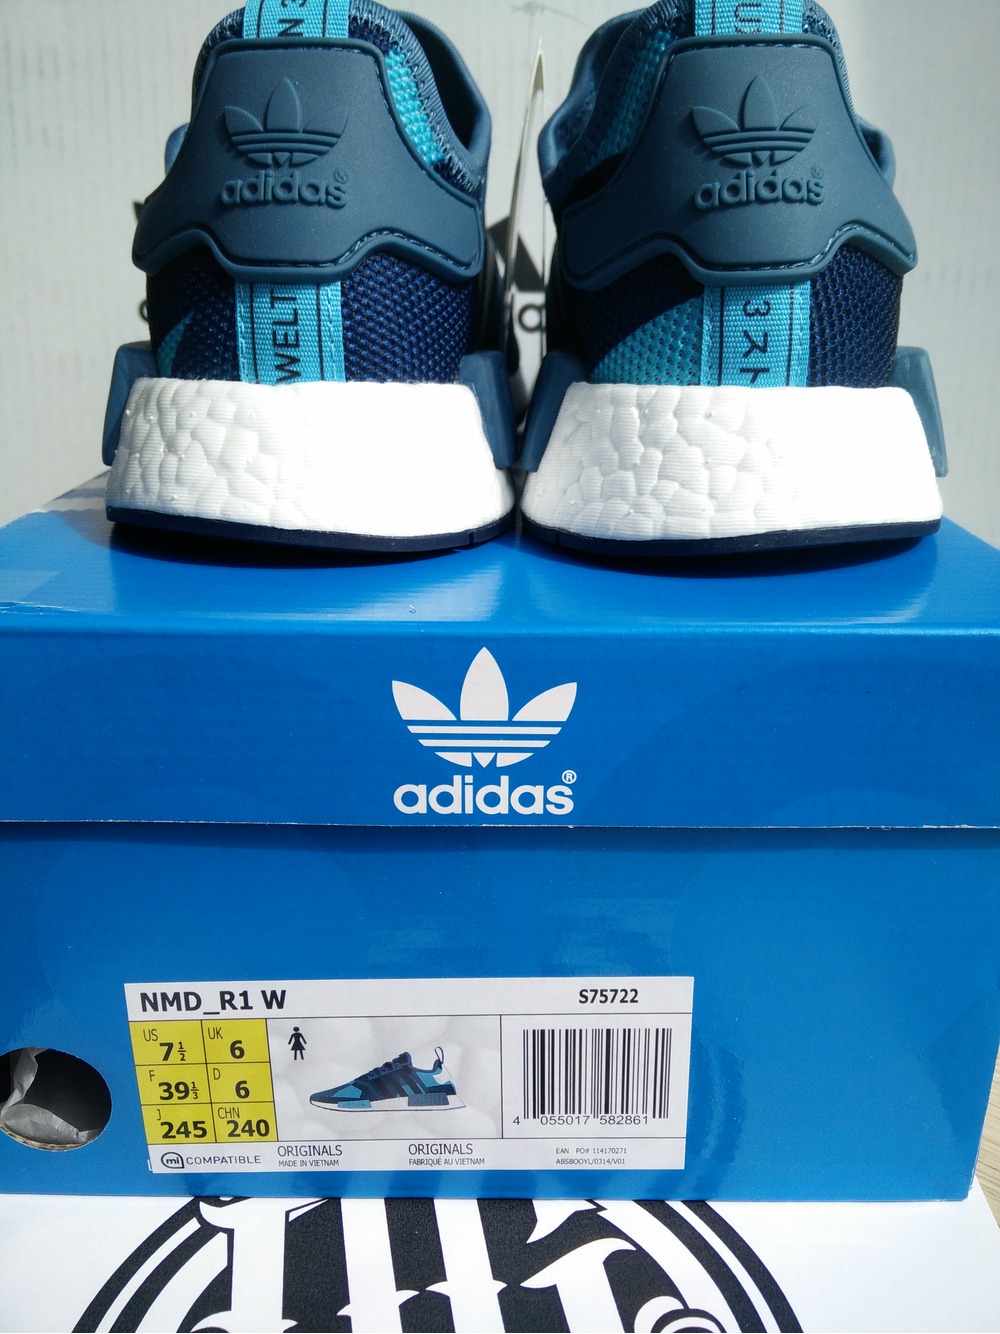 Buy nmd adidas size 5 - 50% OFF